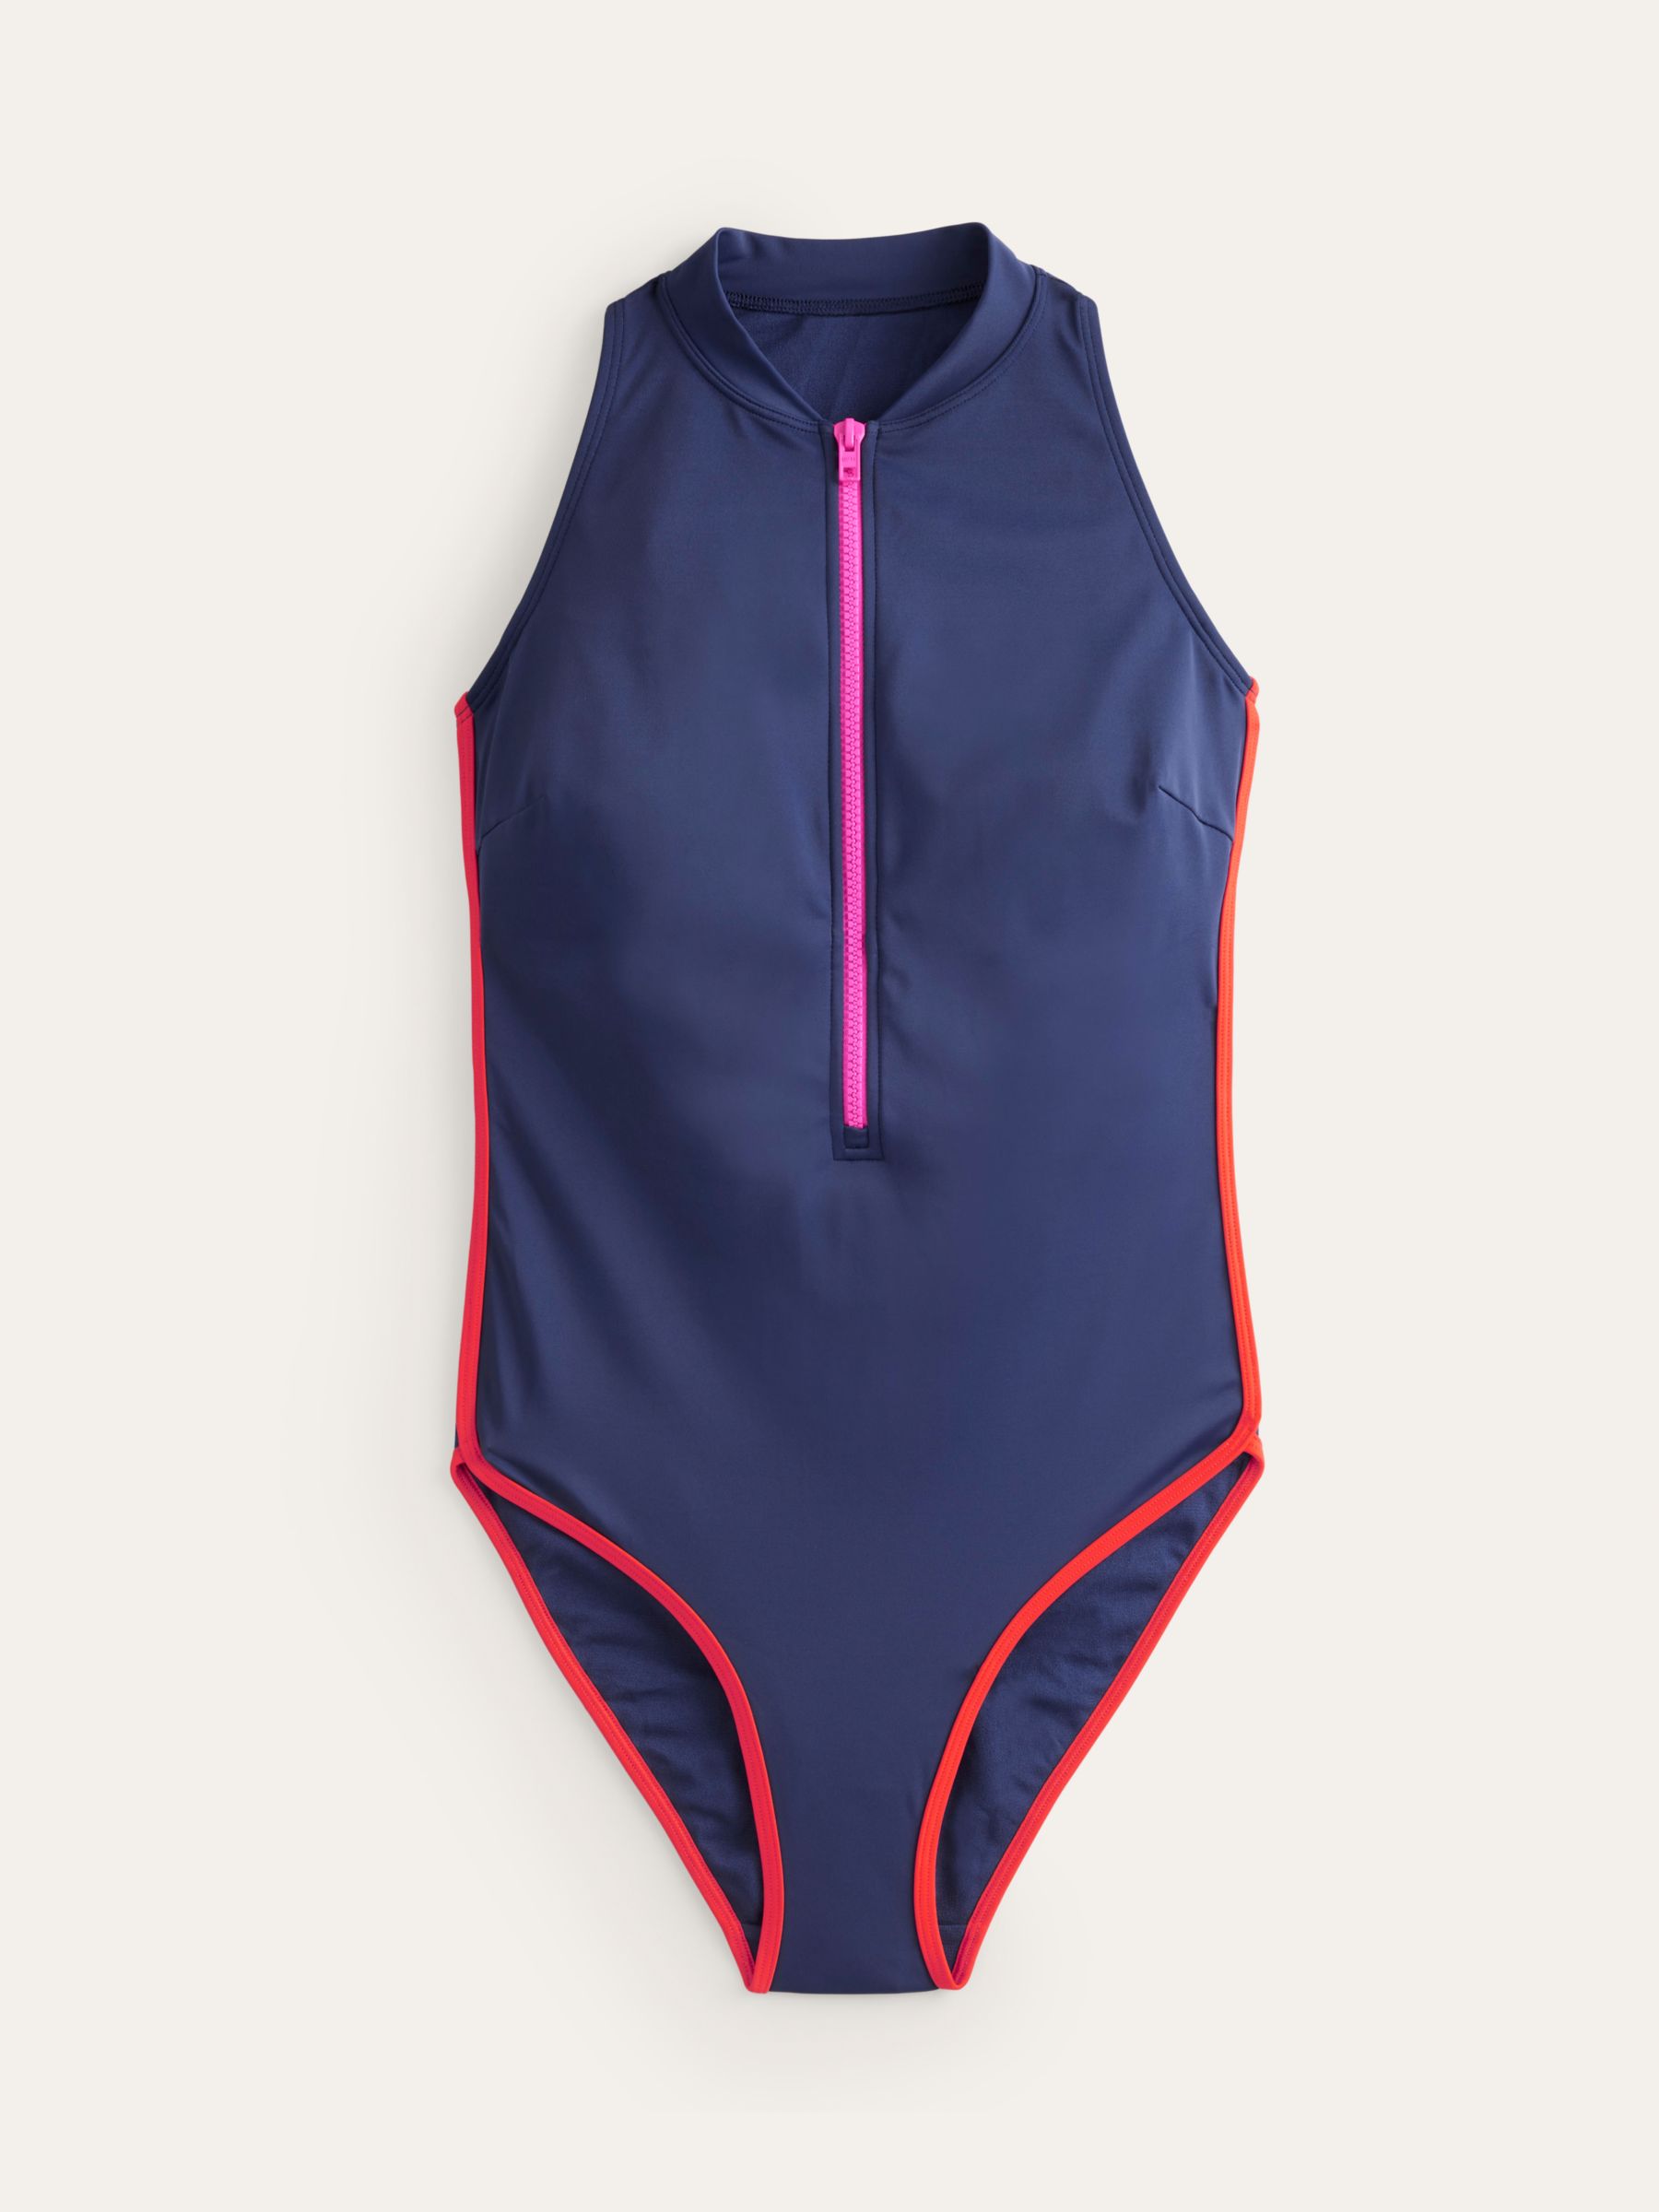 Boden Piped Sporty Swimsuit, Navy/Super Pink, 8